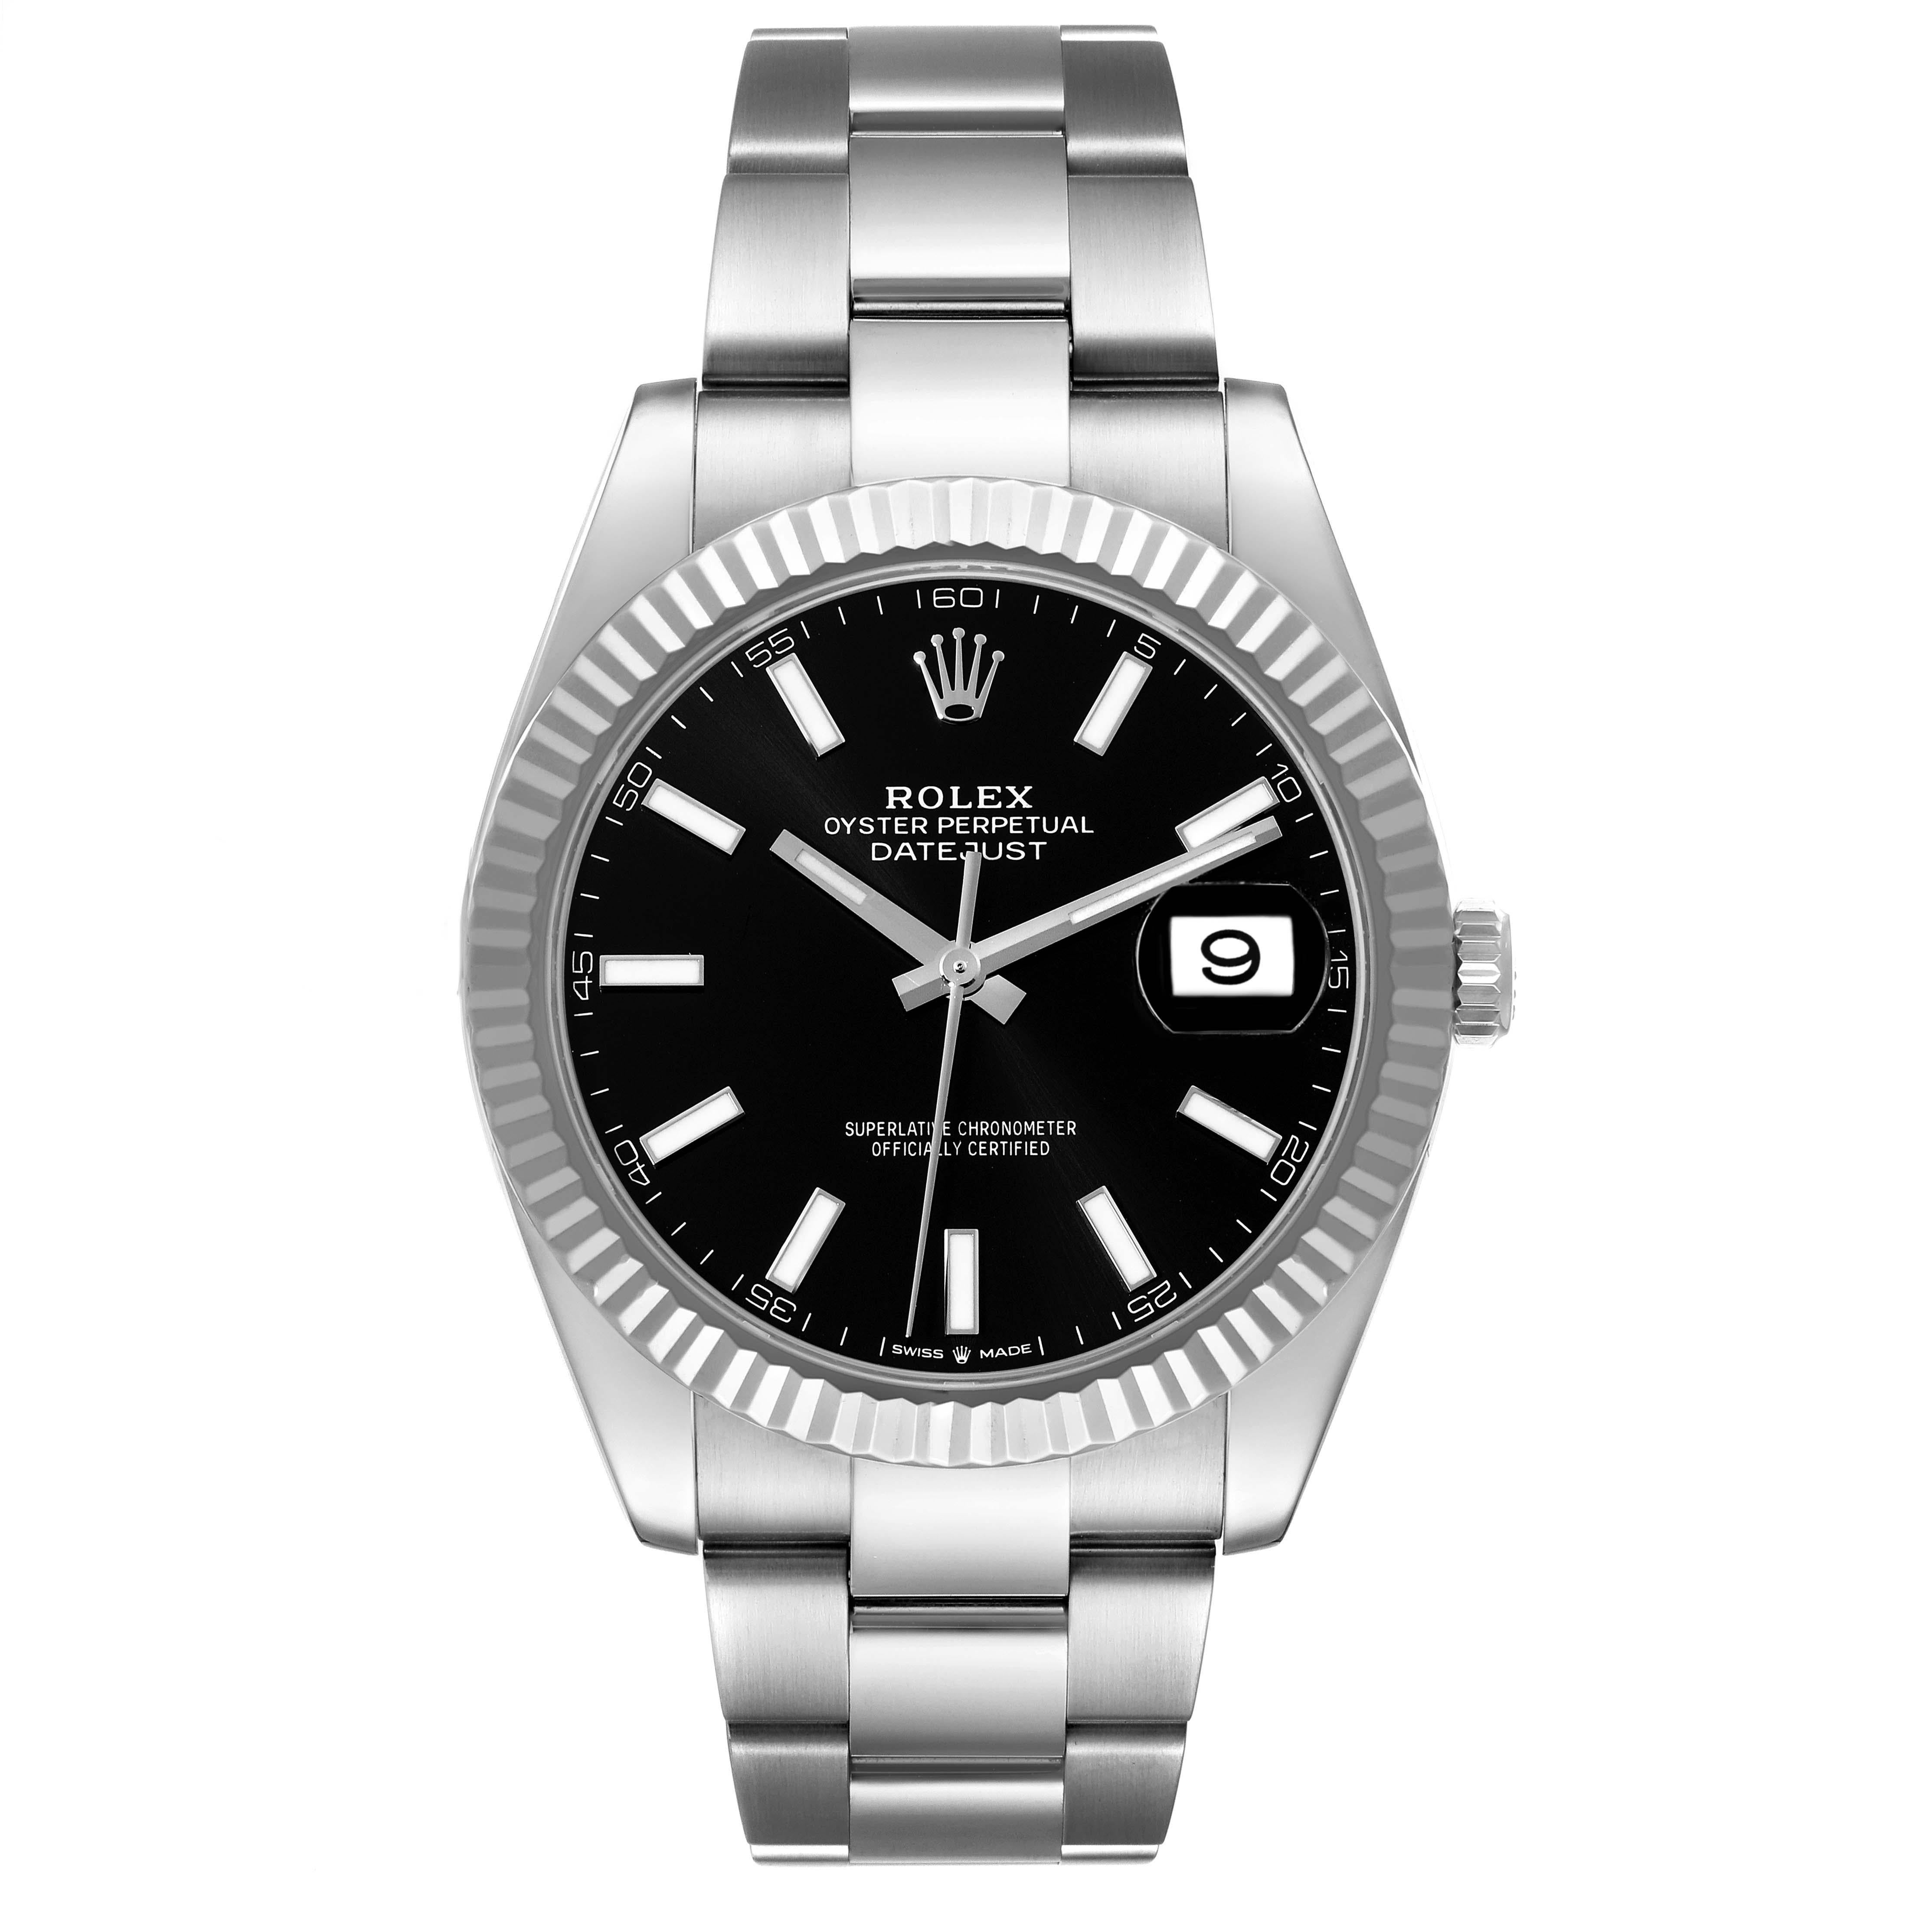 Rolex Datejust 41 Steel White Gold Black Dial Mens Watch 126334 Unworn. Officially certified chronometer automatic self-winding movement. Stainless steel case 41 mm in diameter. Rolex logo on the crown. 18K white gold fluted bezel. Scratch resistant